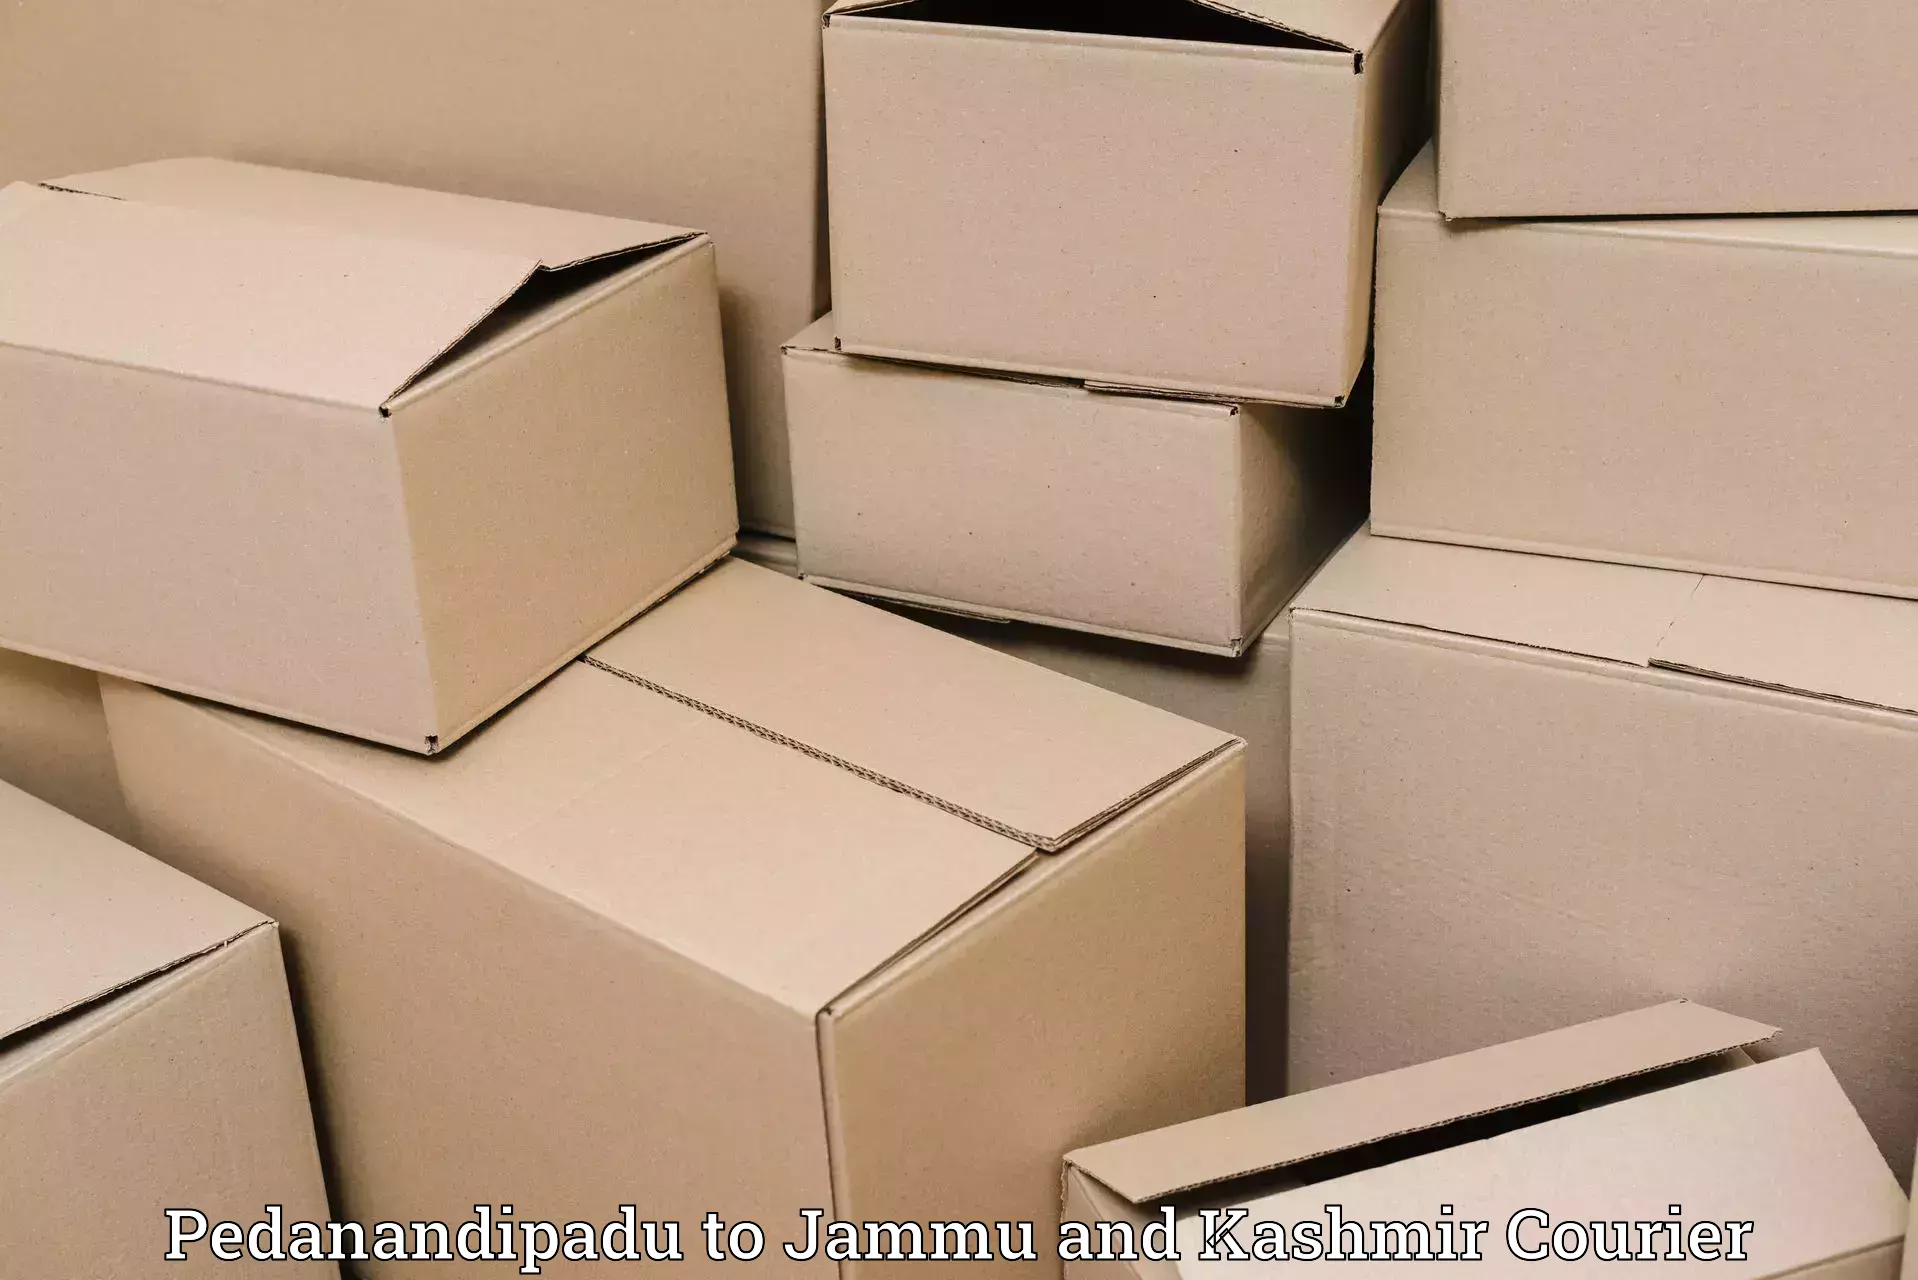 Personal parcel delivery in Pedanandipadu to Poonch